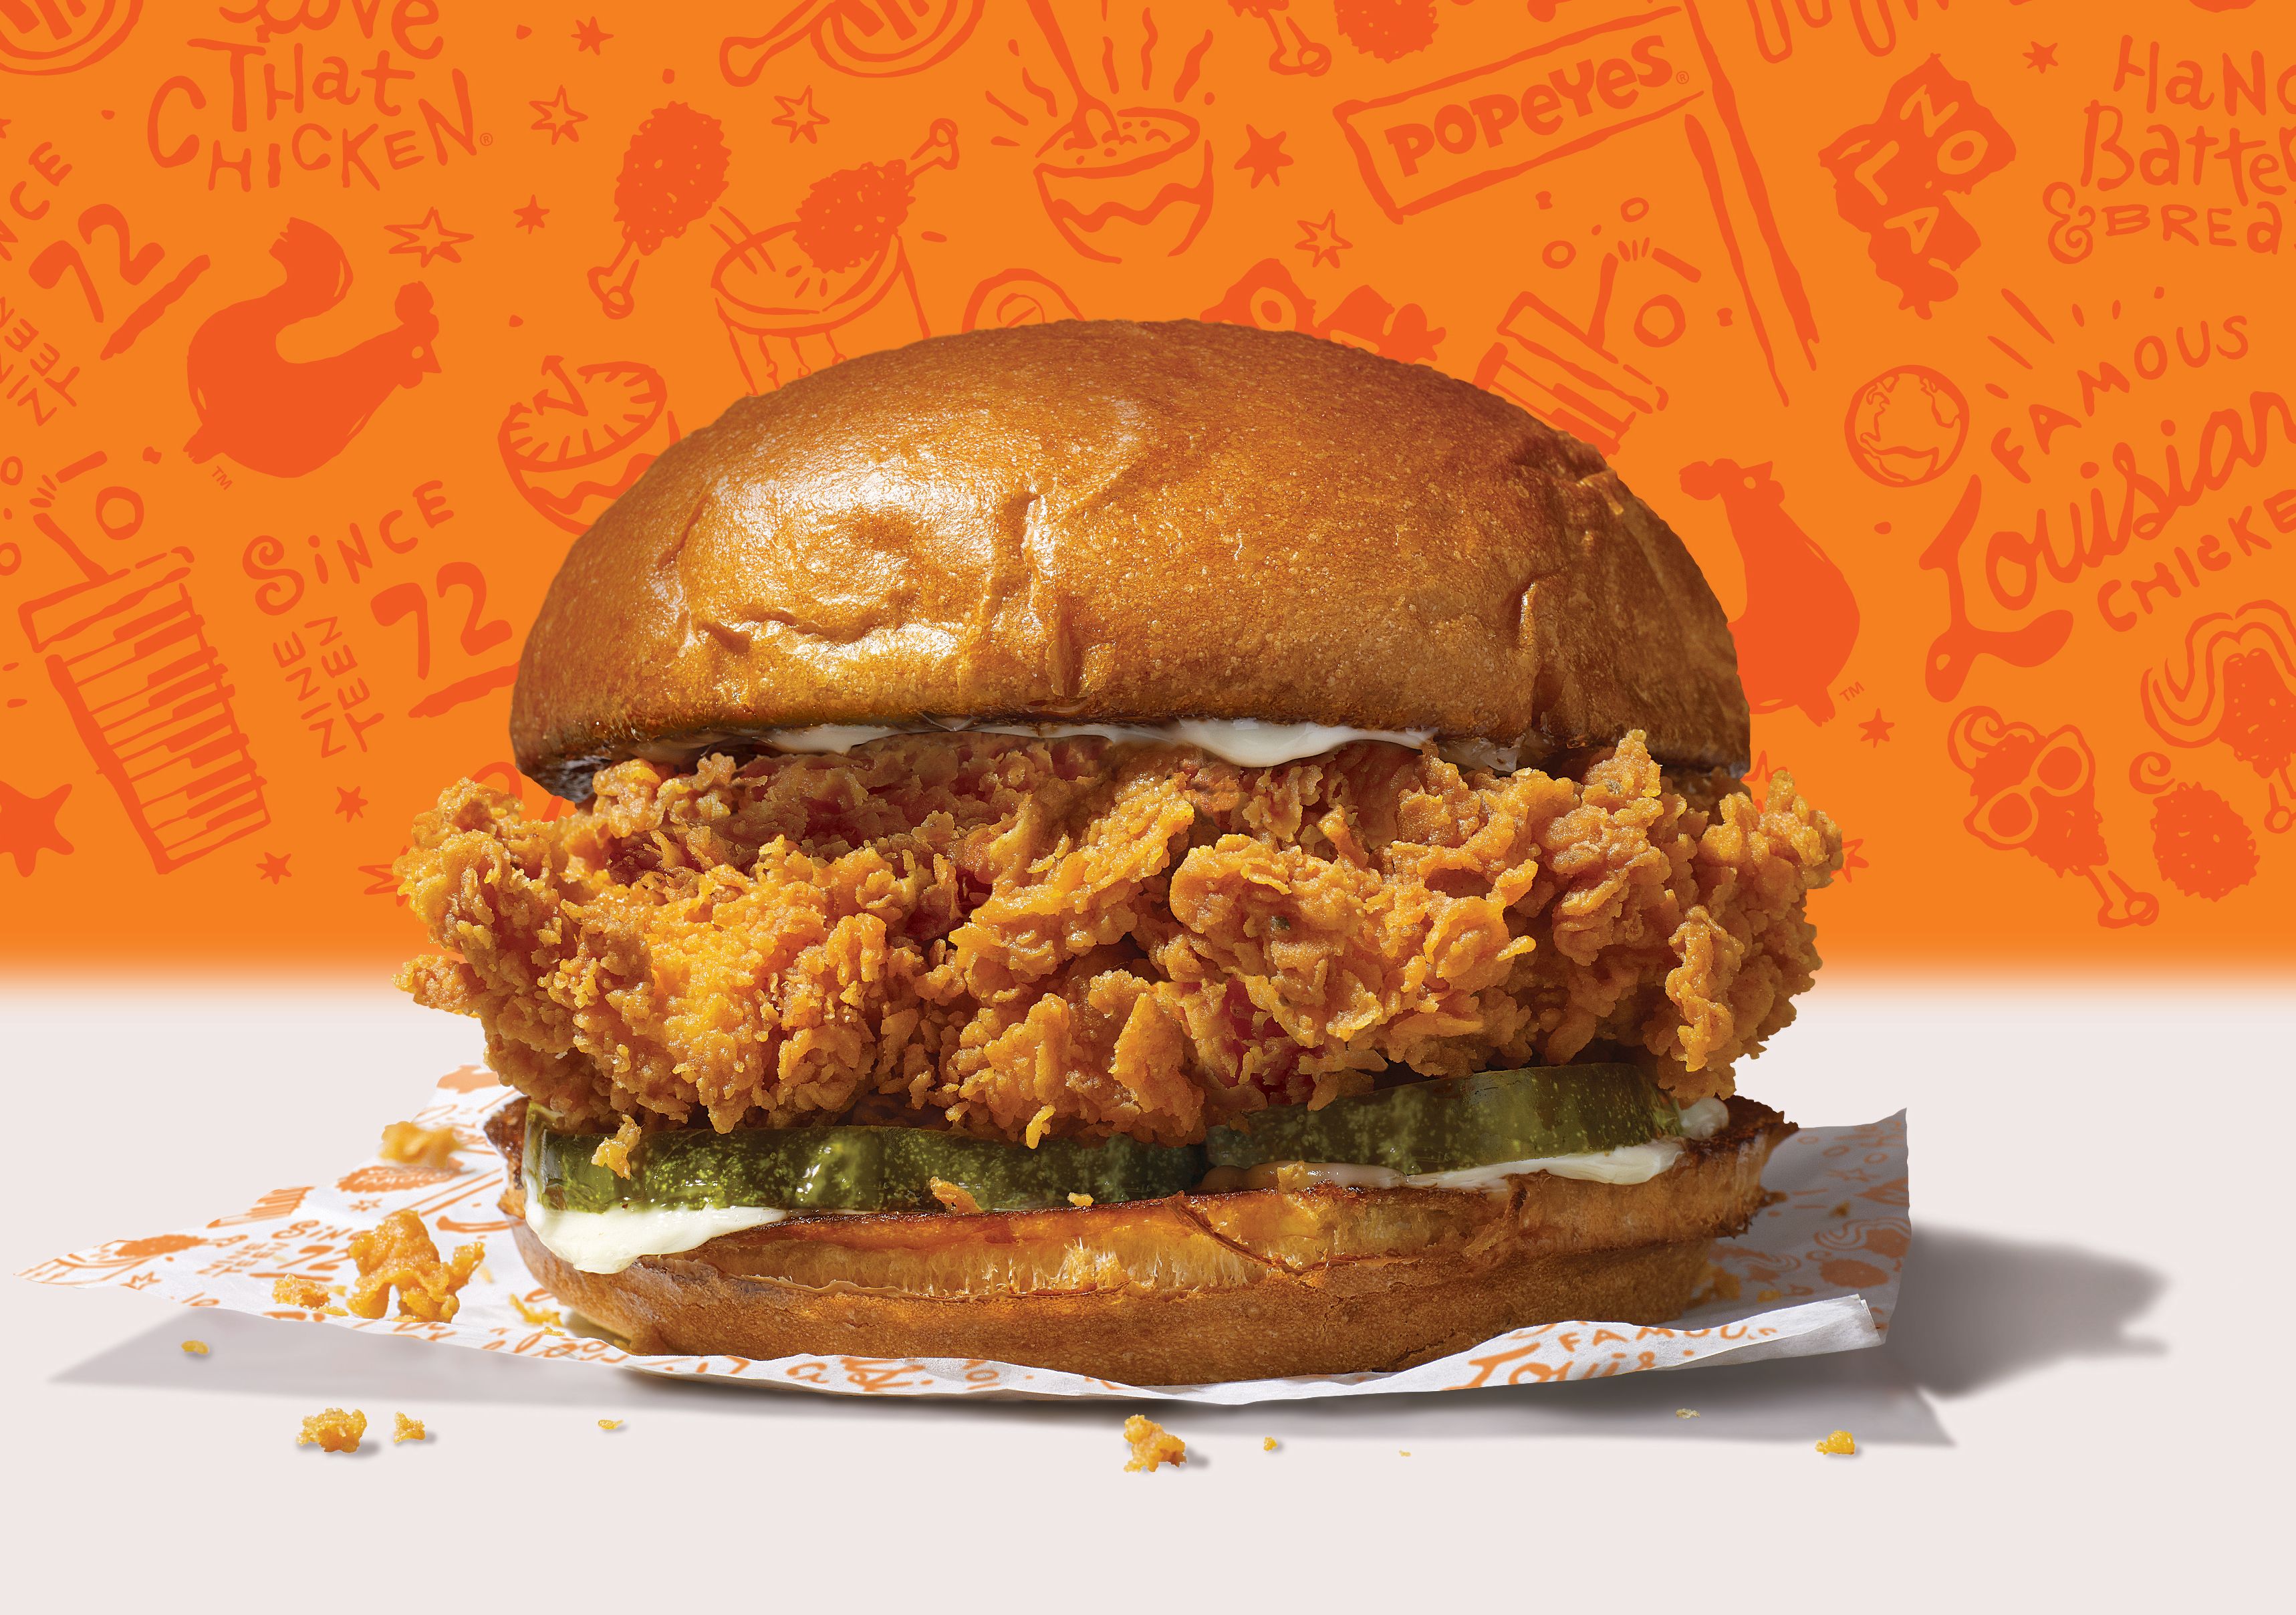 Popeyes is launching its first chicken sandwich nationwide